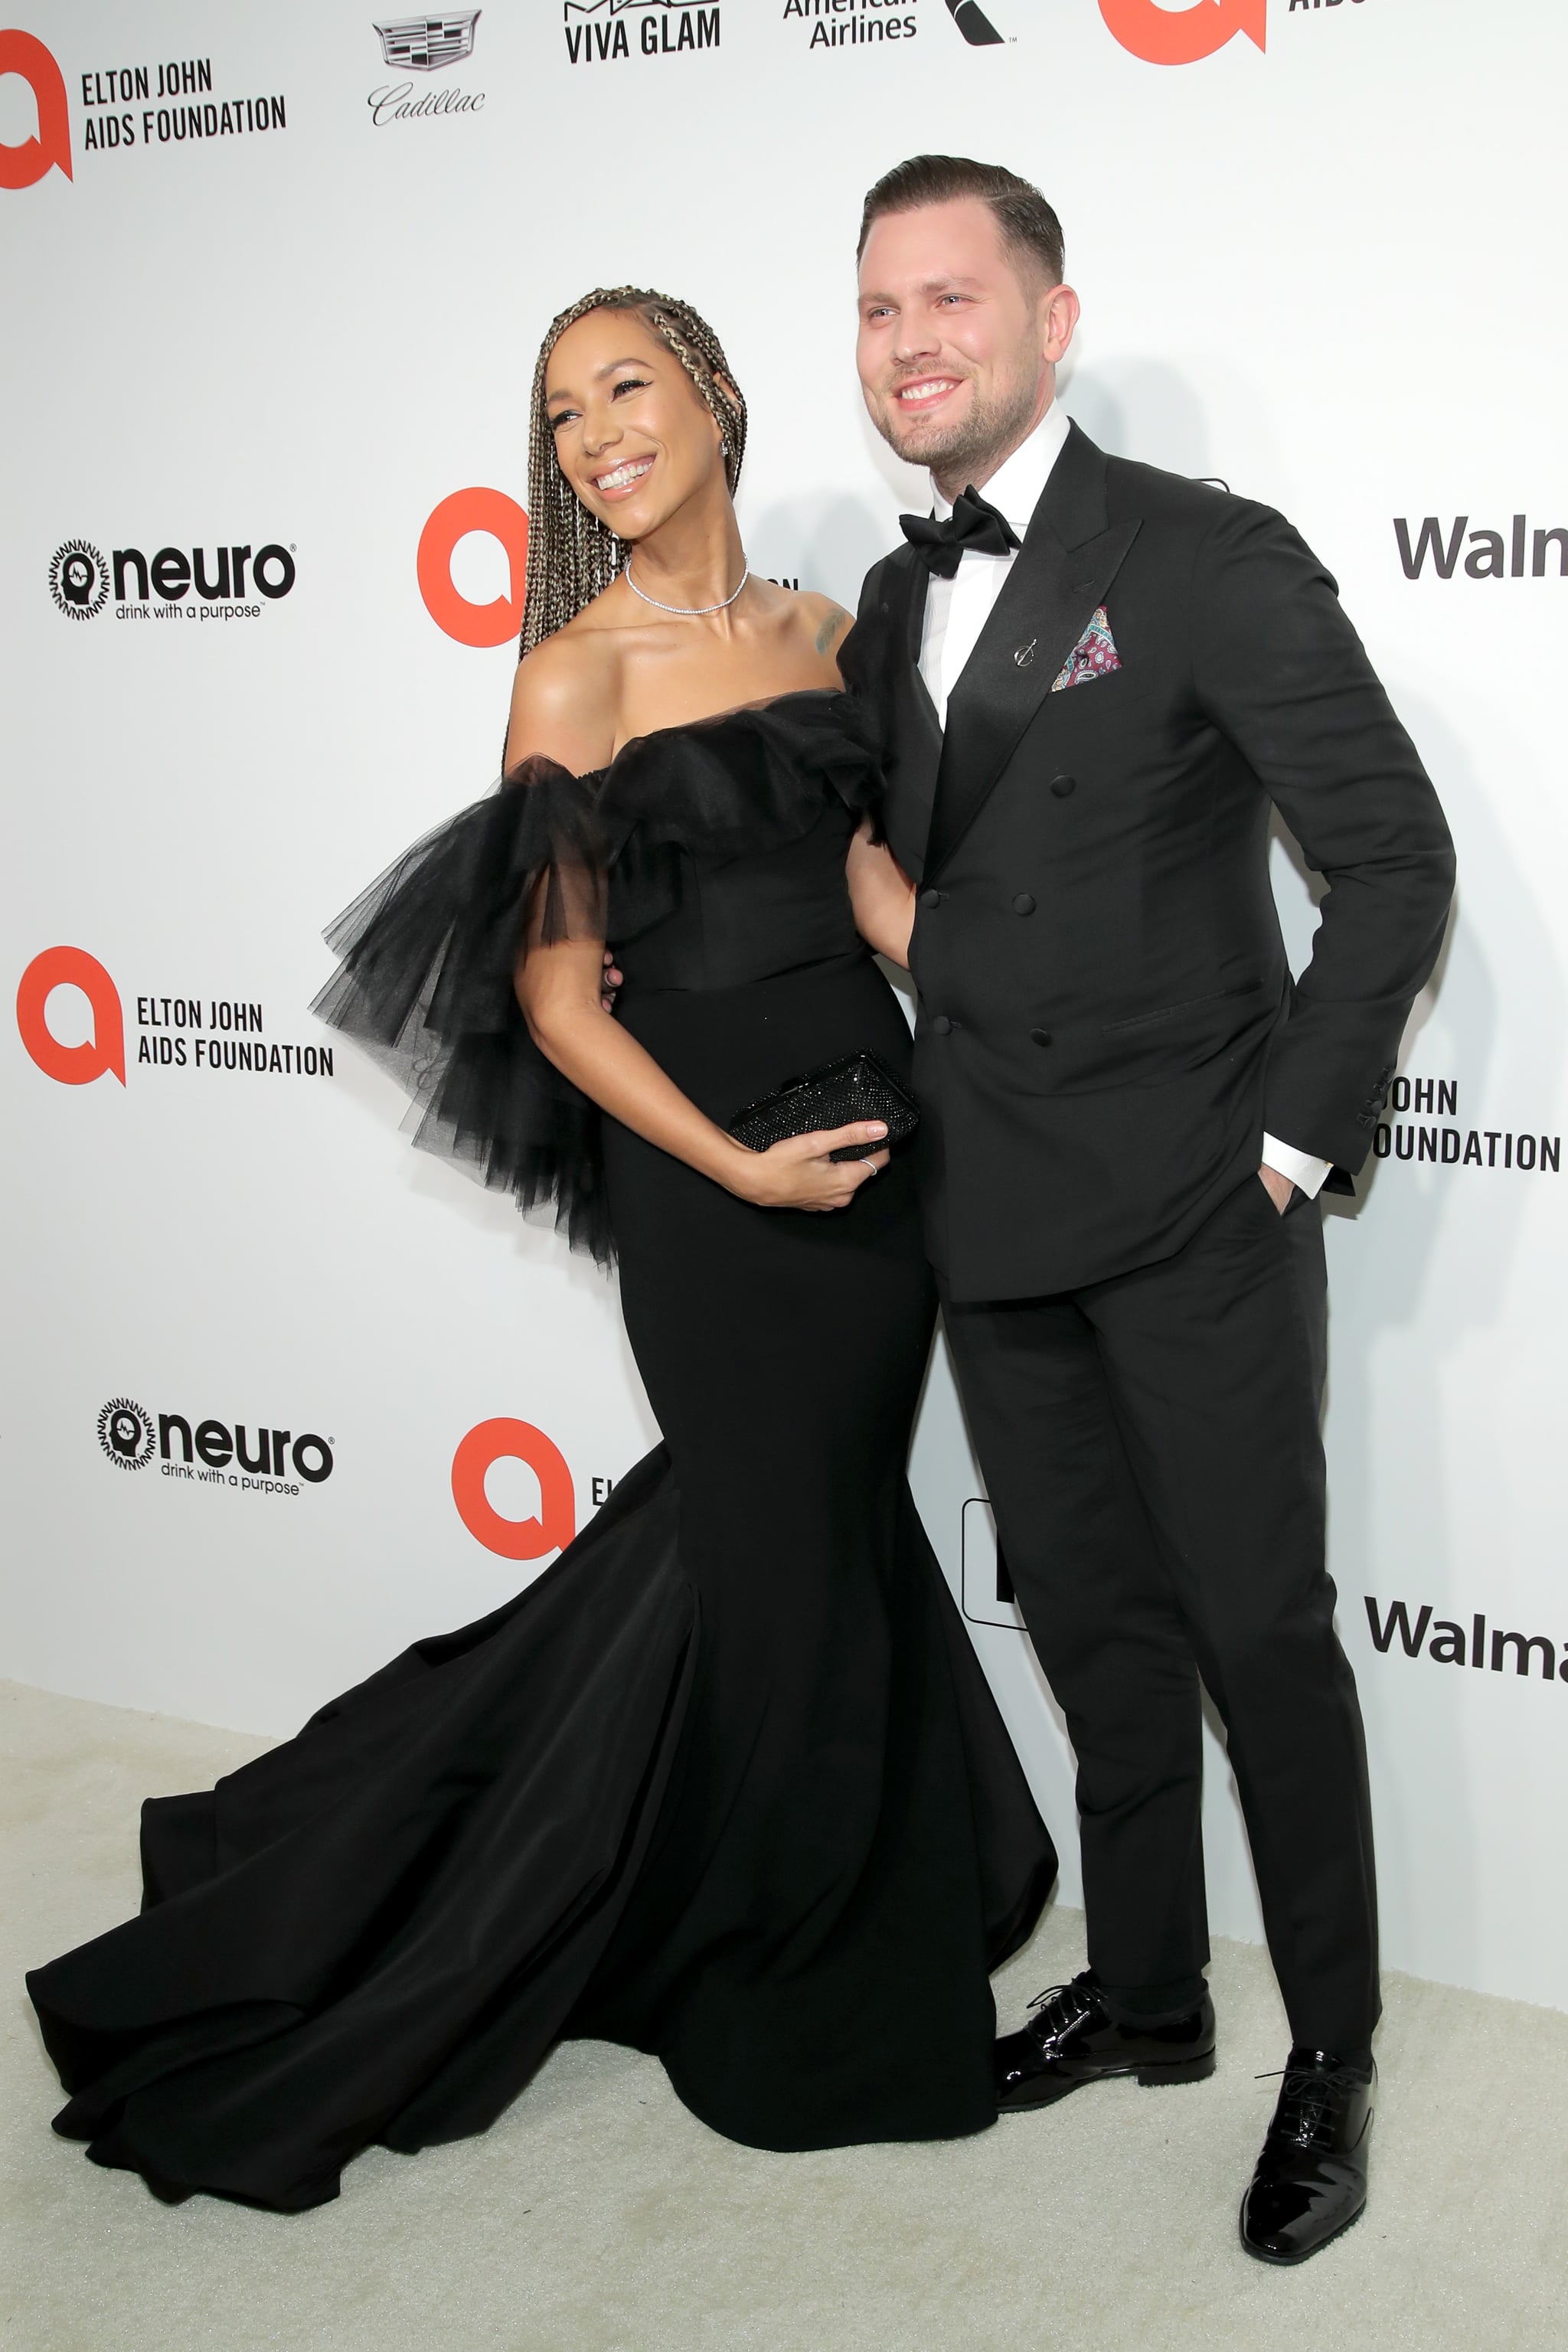 WEST HOLLYWOOD, CALIFORNIA - FEBRUARY 09: (L-R) Leona Lewis and Dennis Jauch attend the 28th Annual Elton John AIDS Foundation Academy Awards Viewing Party sponsored by IMDb, Neuro Drinks and Walmart on February 09, 2020 in West Hollywood, California. (Photo by Jemal Countess/Getty Images)